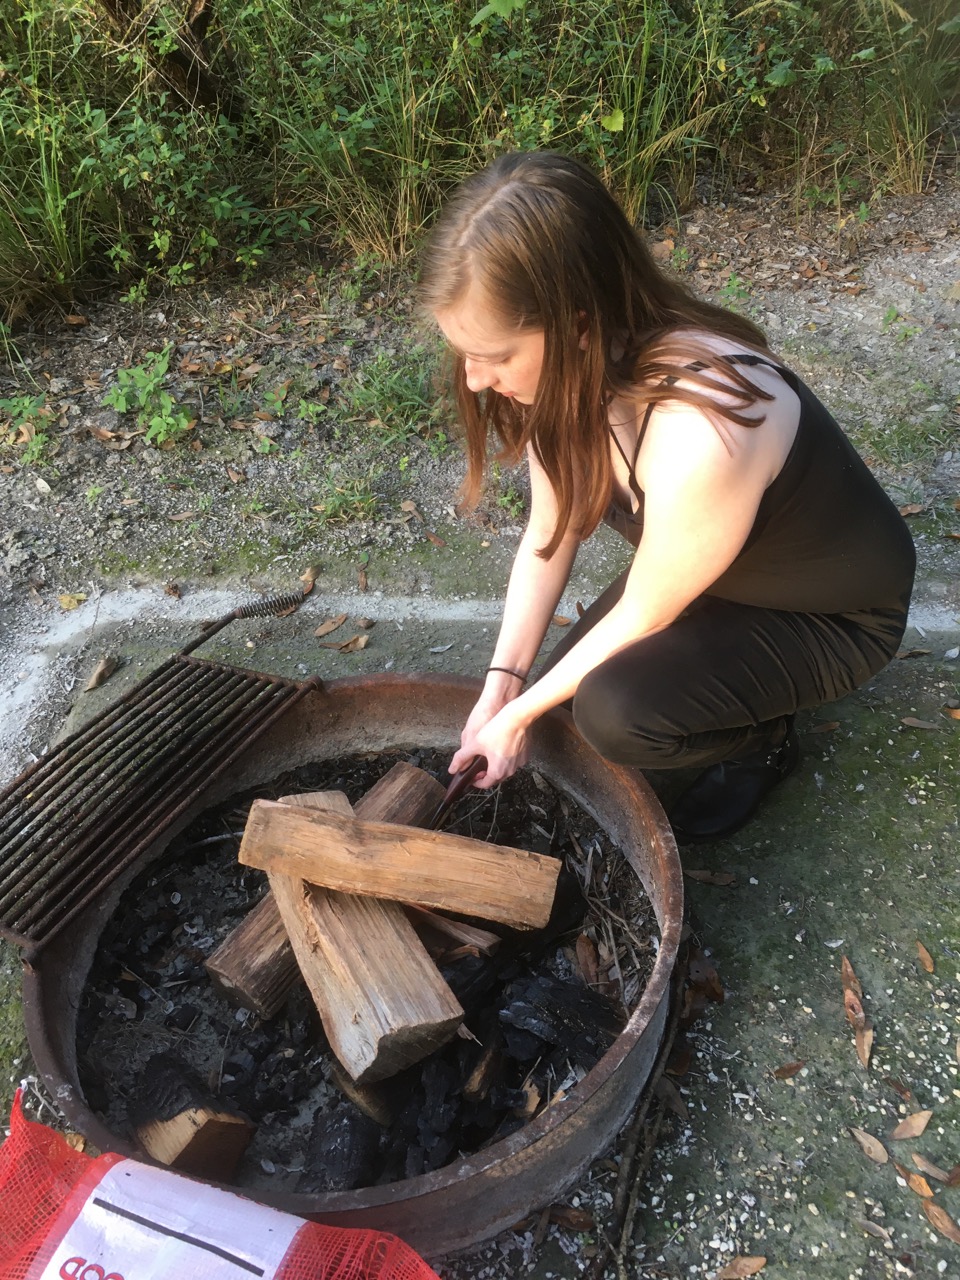 My niece lighting our campfire at Lake Louisa. 